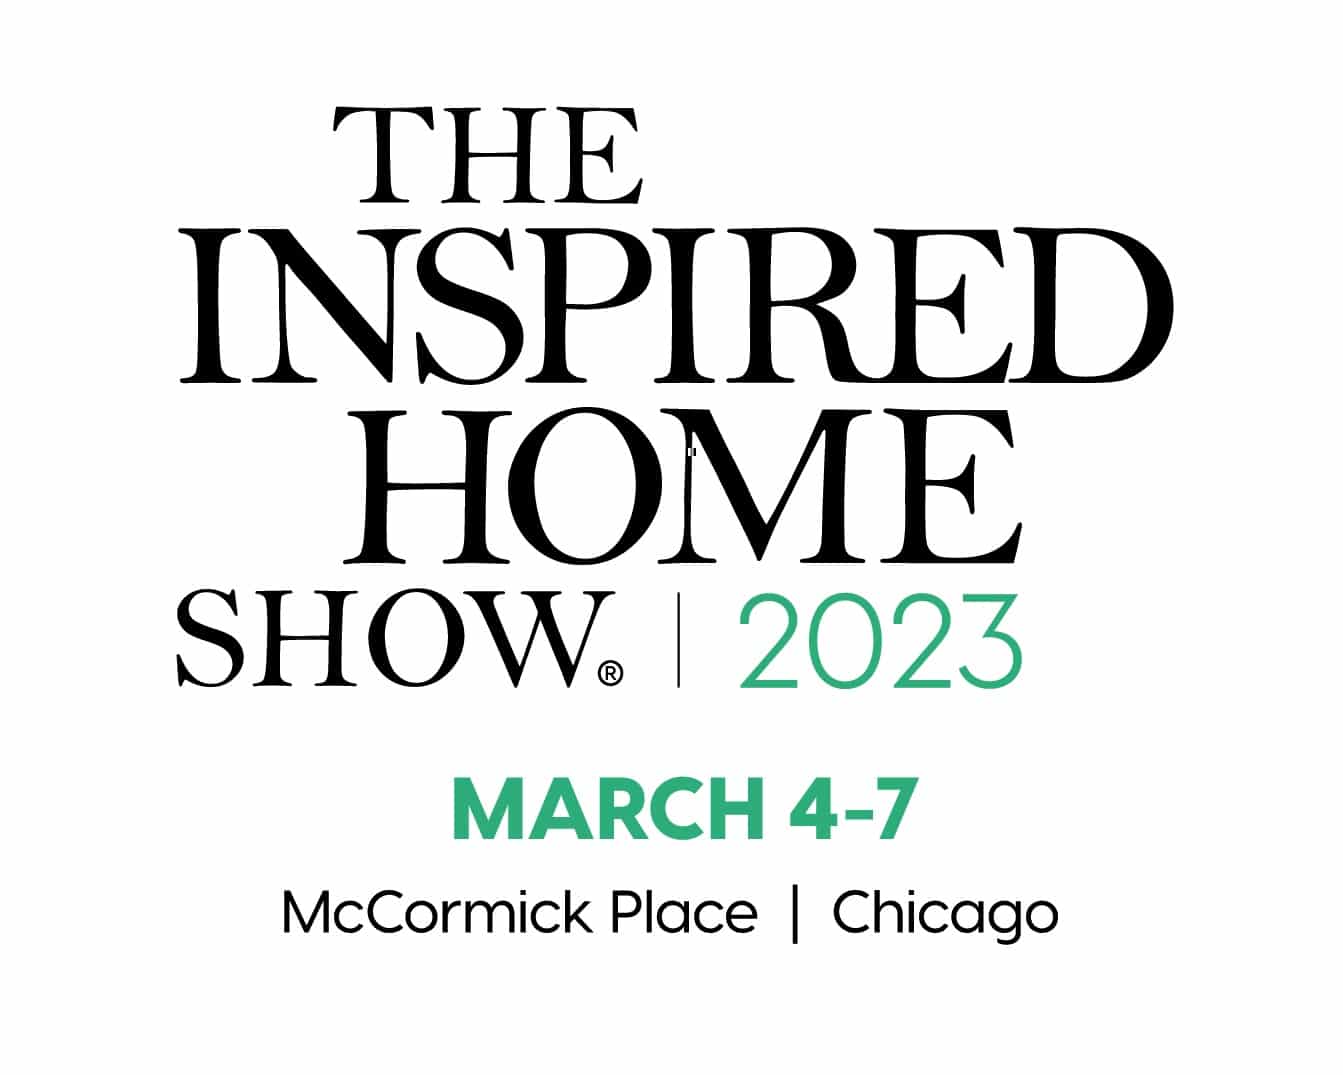 Product Display Opportunities at The Inspired Home Show